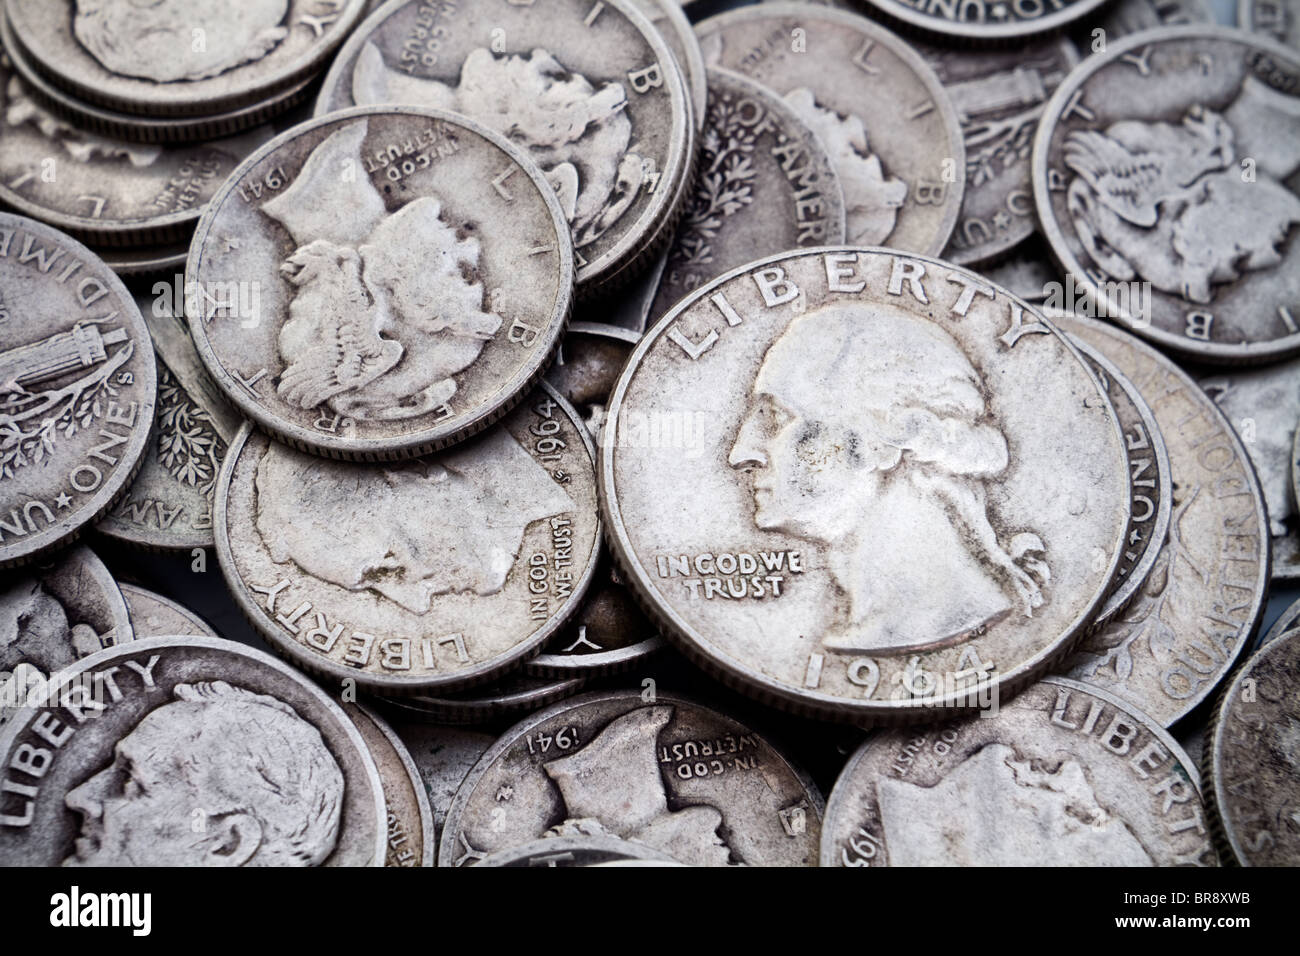 A pile of USA 90% silver content coins. Good for collectible or bullion themes. Stock Photo